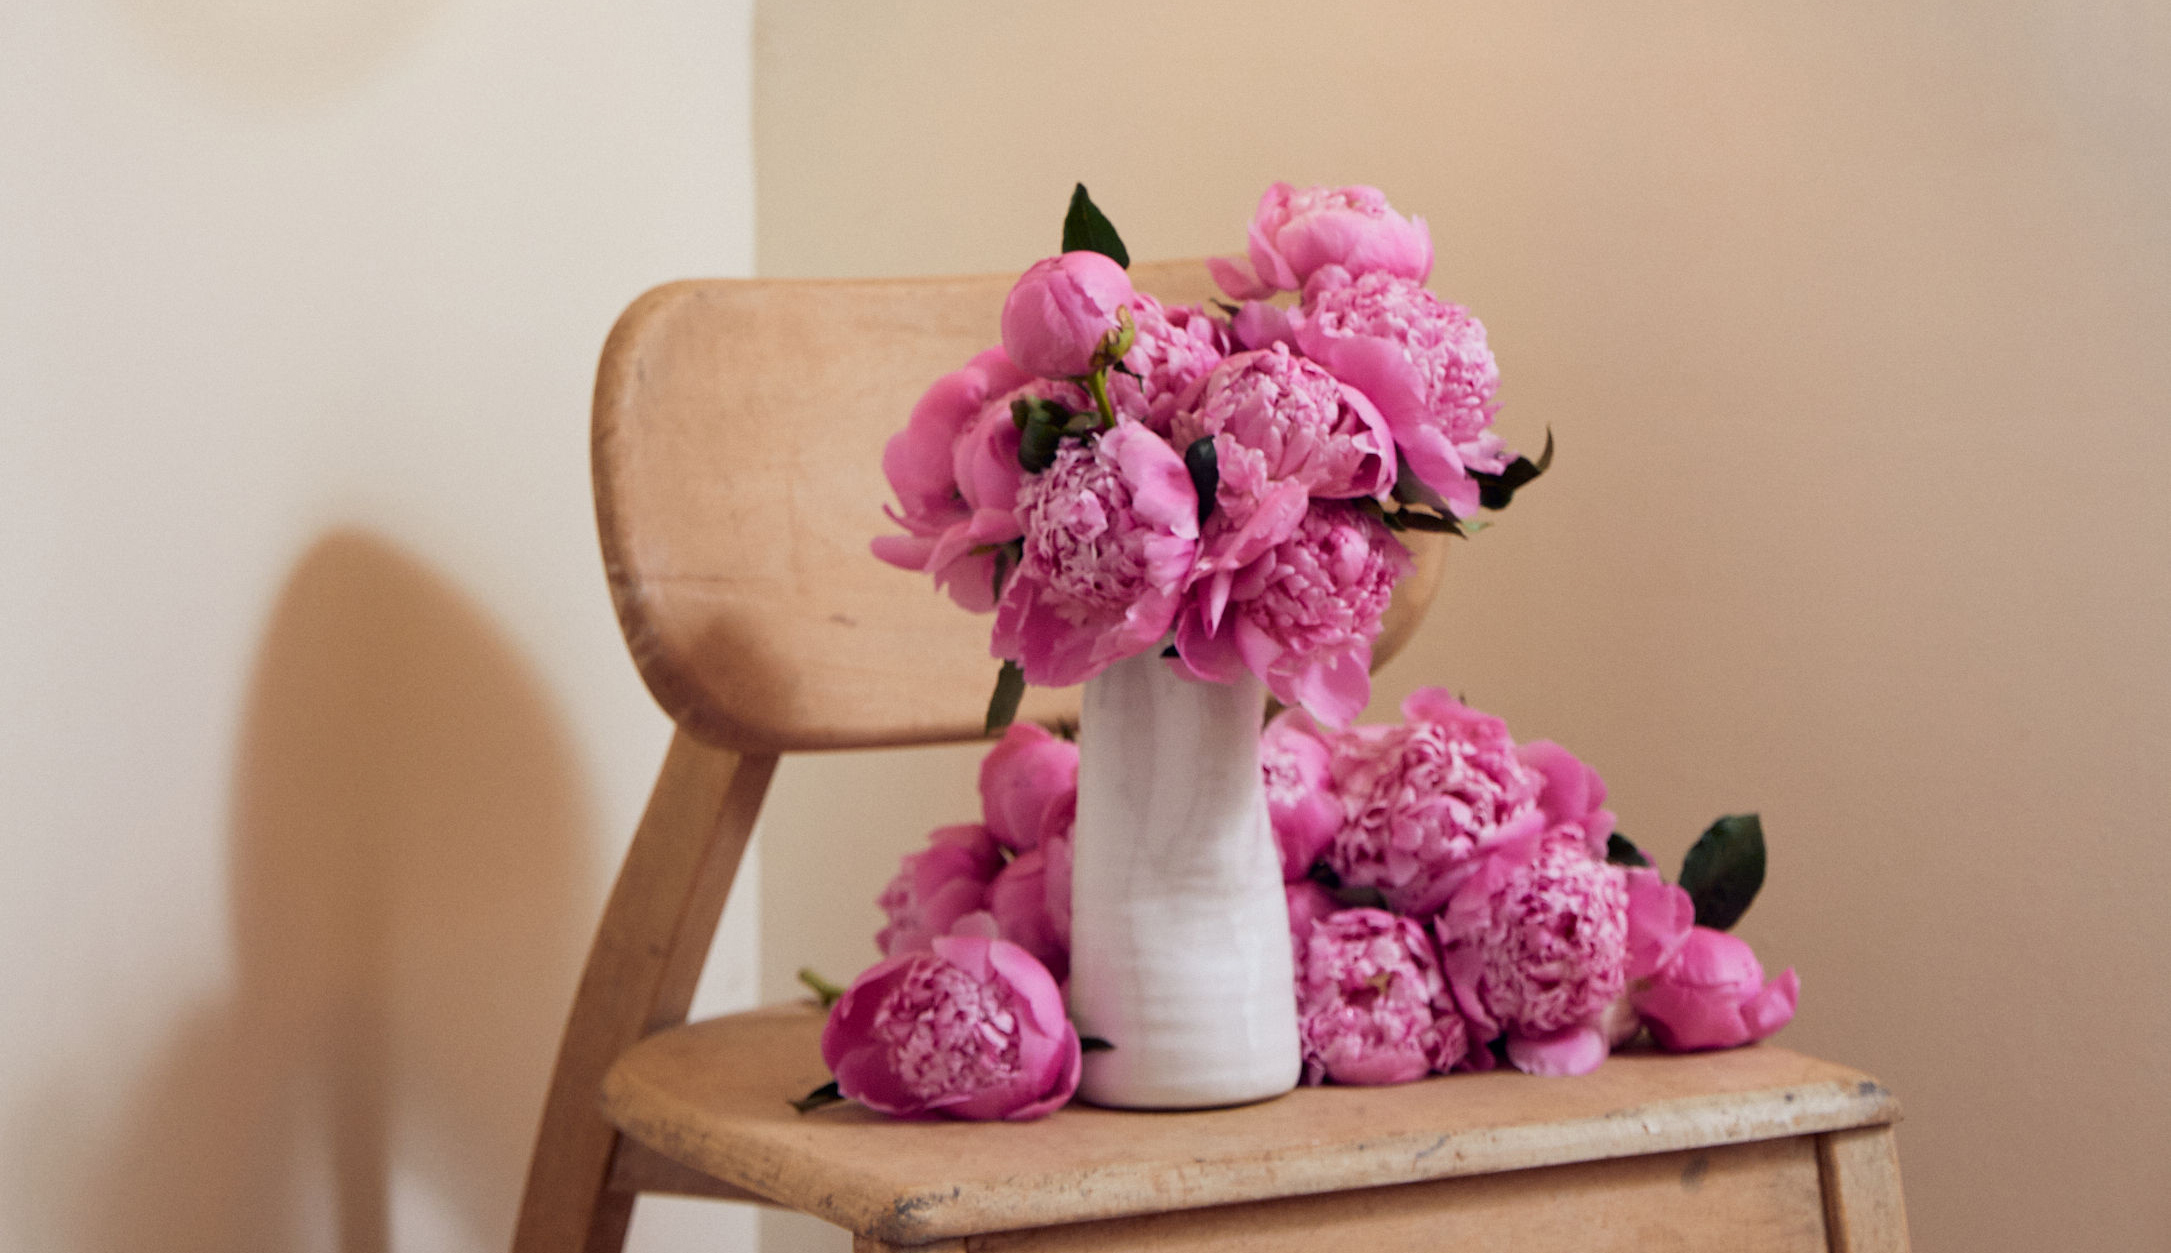 Bright pink peony bouquet resting on a wooden chair